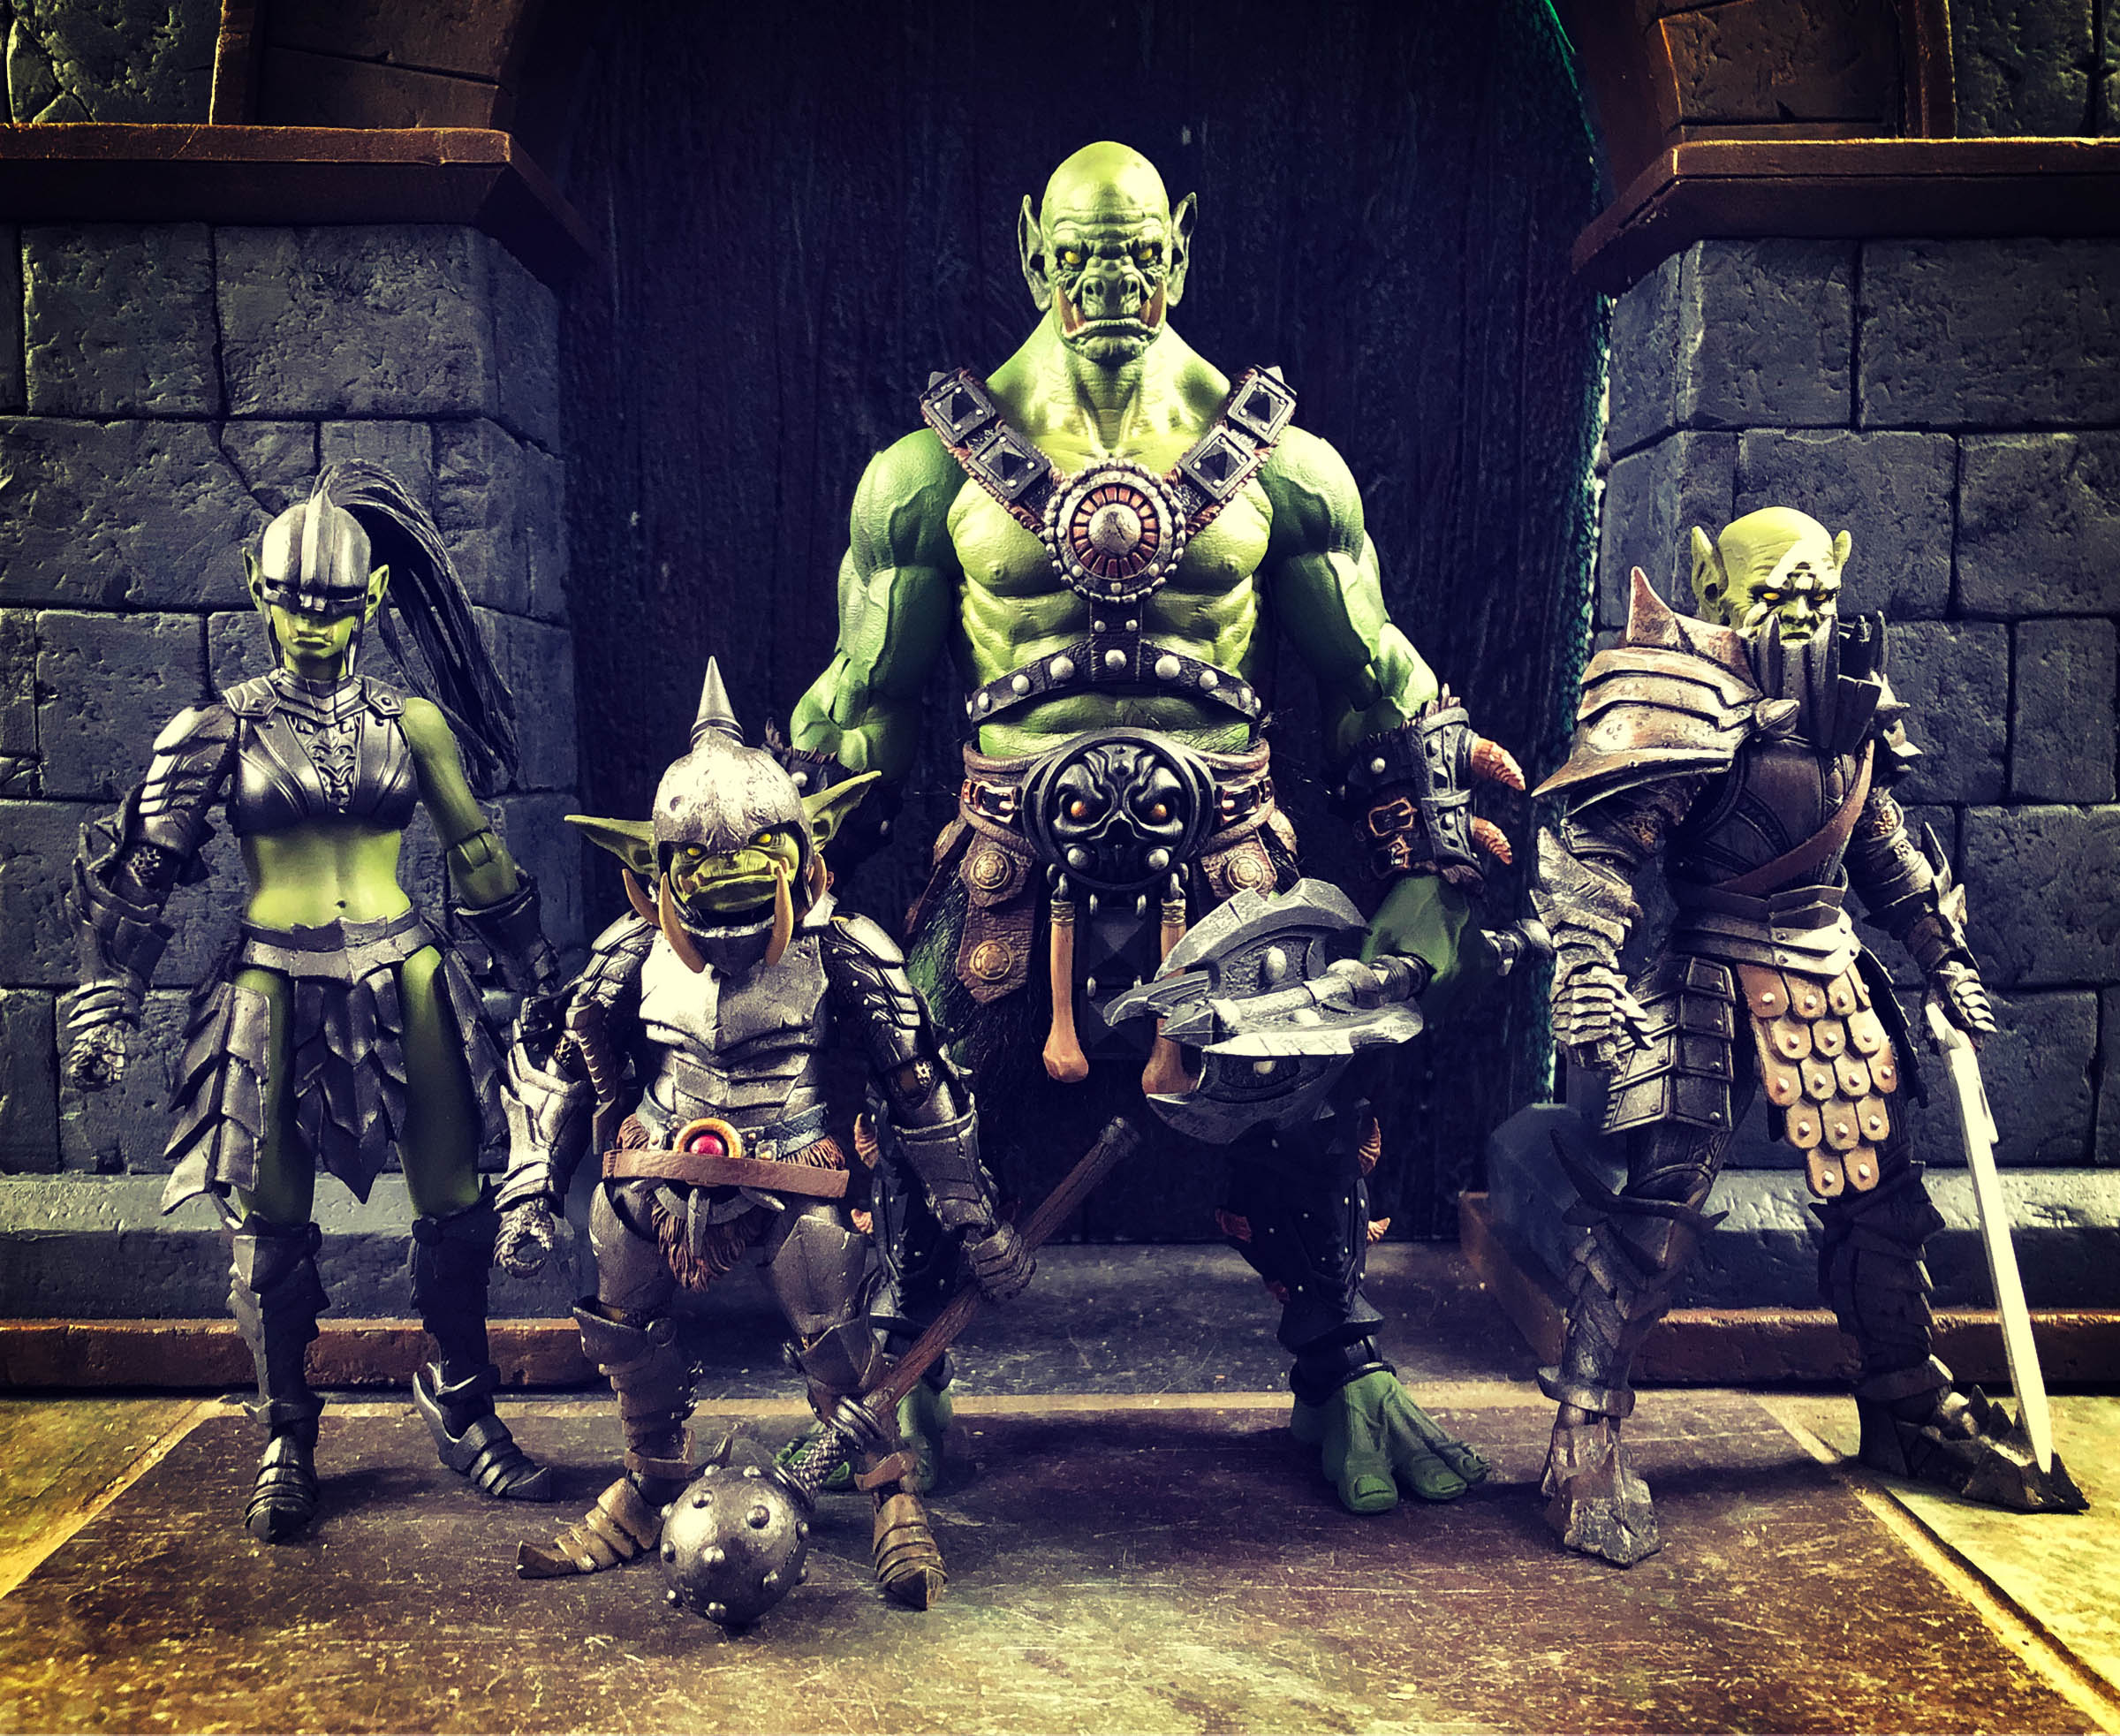 Mythic Legions figure scales